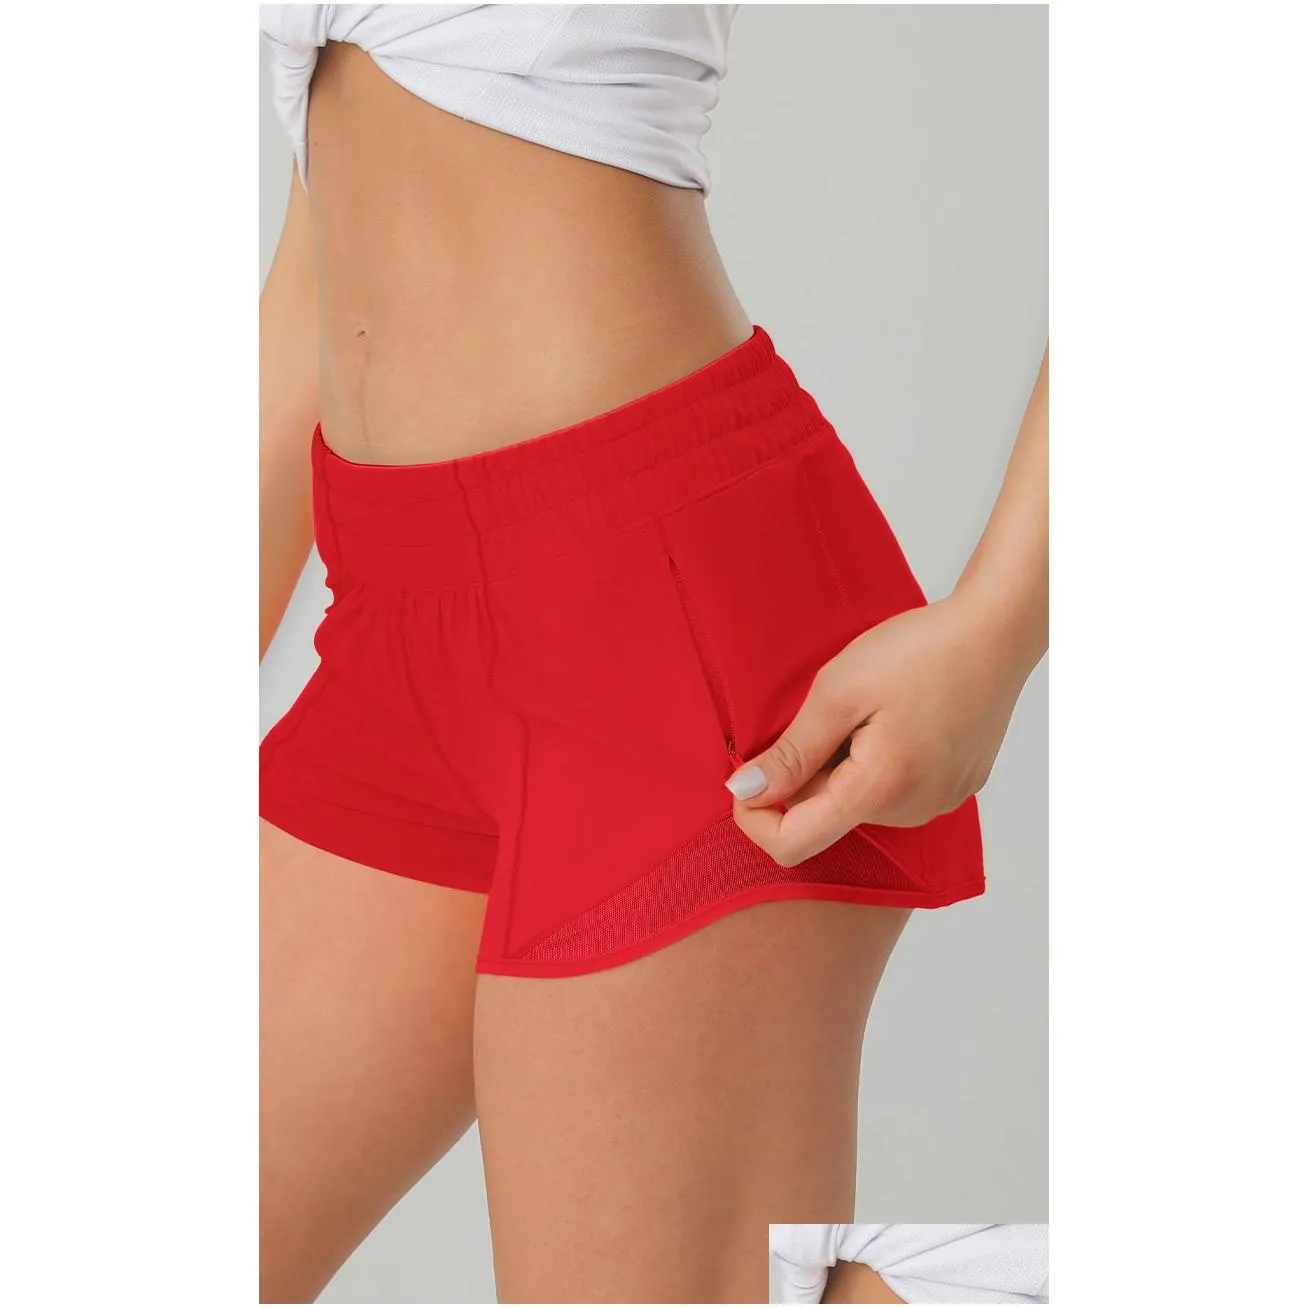 LU-650 Womens Yoga Shorts Outfits With Exercise Fitness Wear Hotty Short Girls Running Elastic Pants Sportswear Pockets Hot Shorts